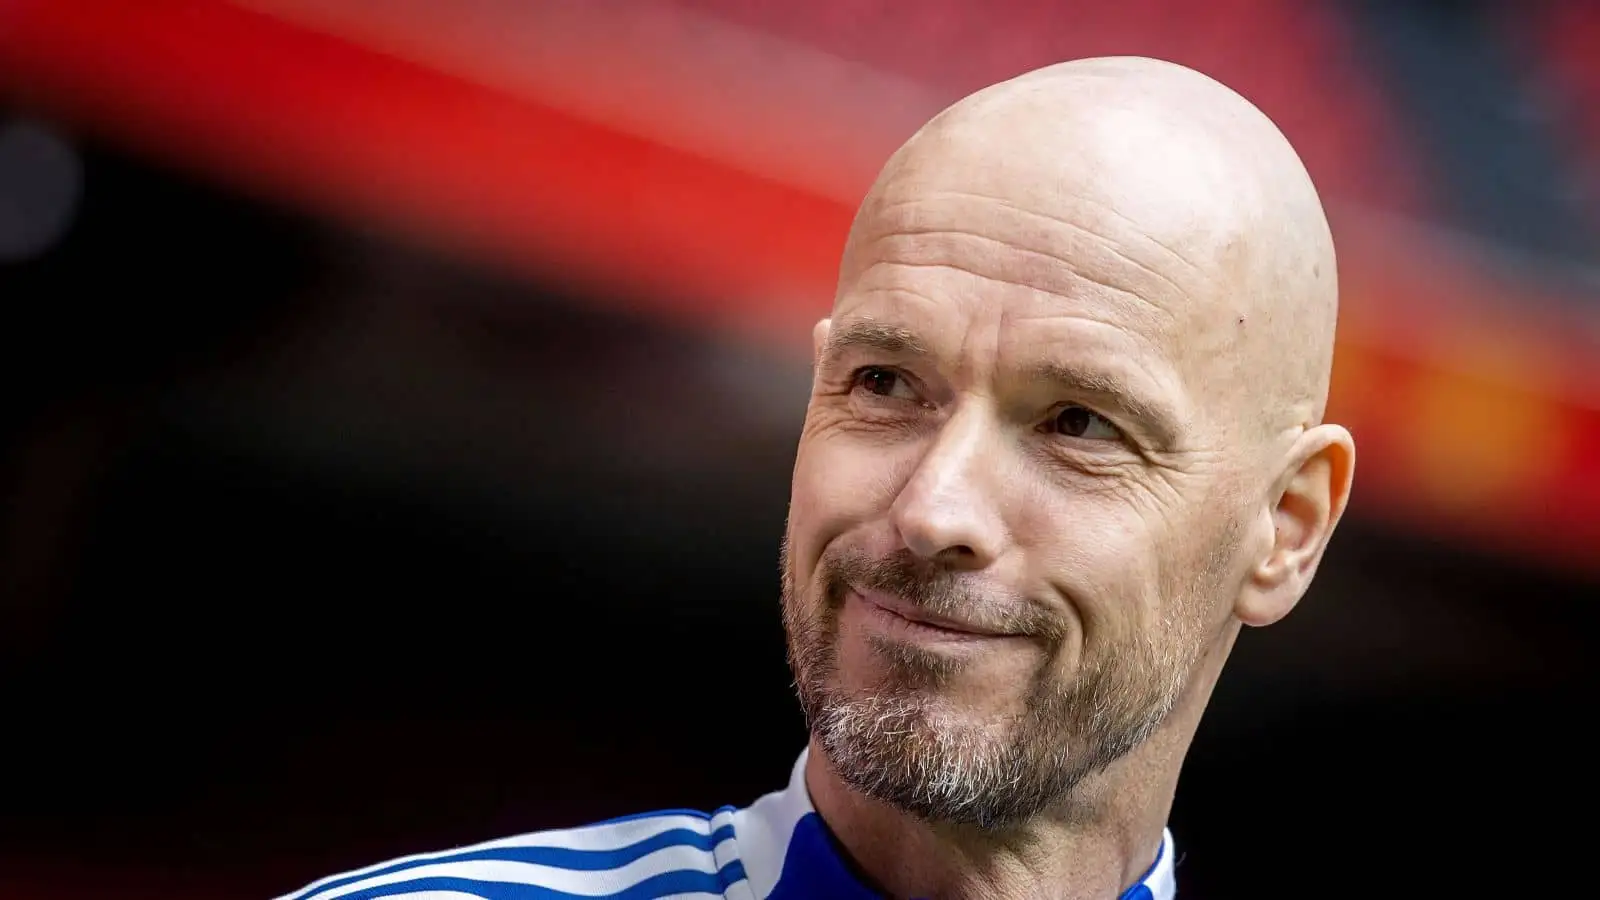 Ajax coach Erik ten Hag during the Toto KNVB Cup Press Conference prior to the cup final against PSV at the Johan Cruijff ArenA on April 15, 2022 in Amsterdam